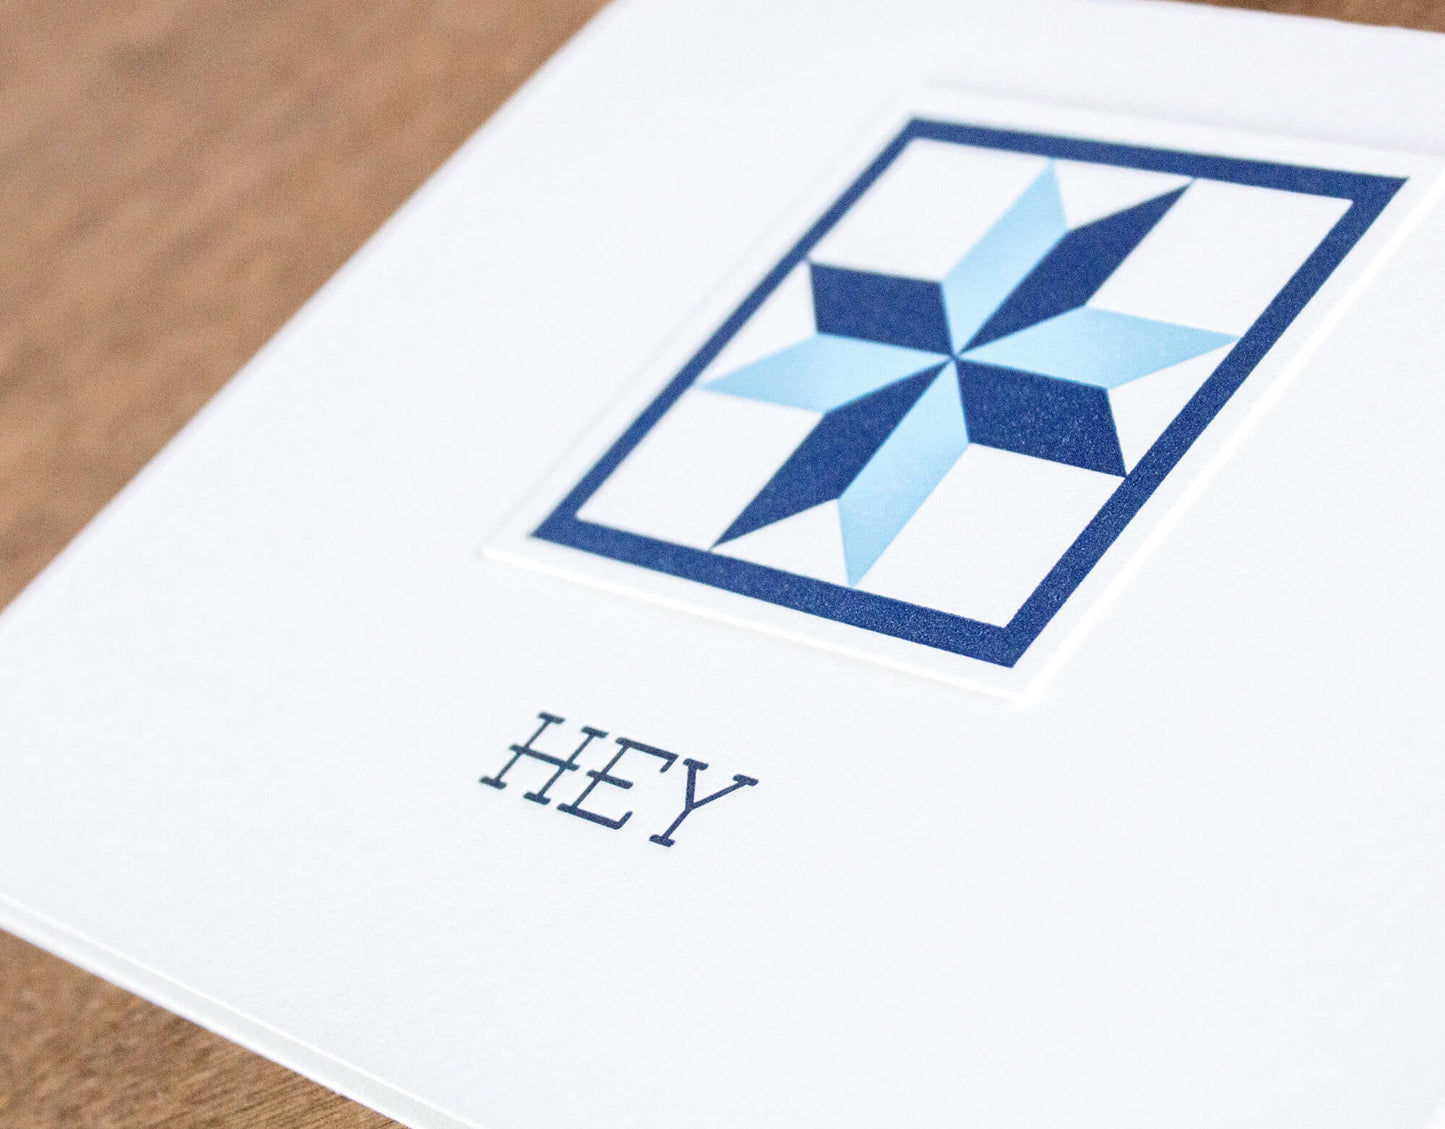 Hey Quilt Letterpress Greeting Card